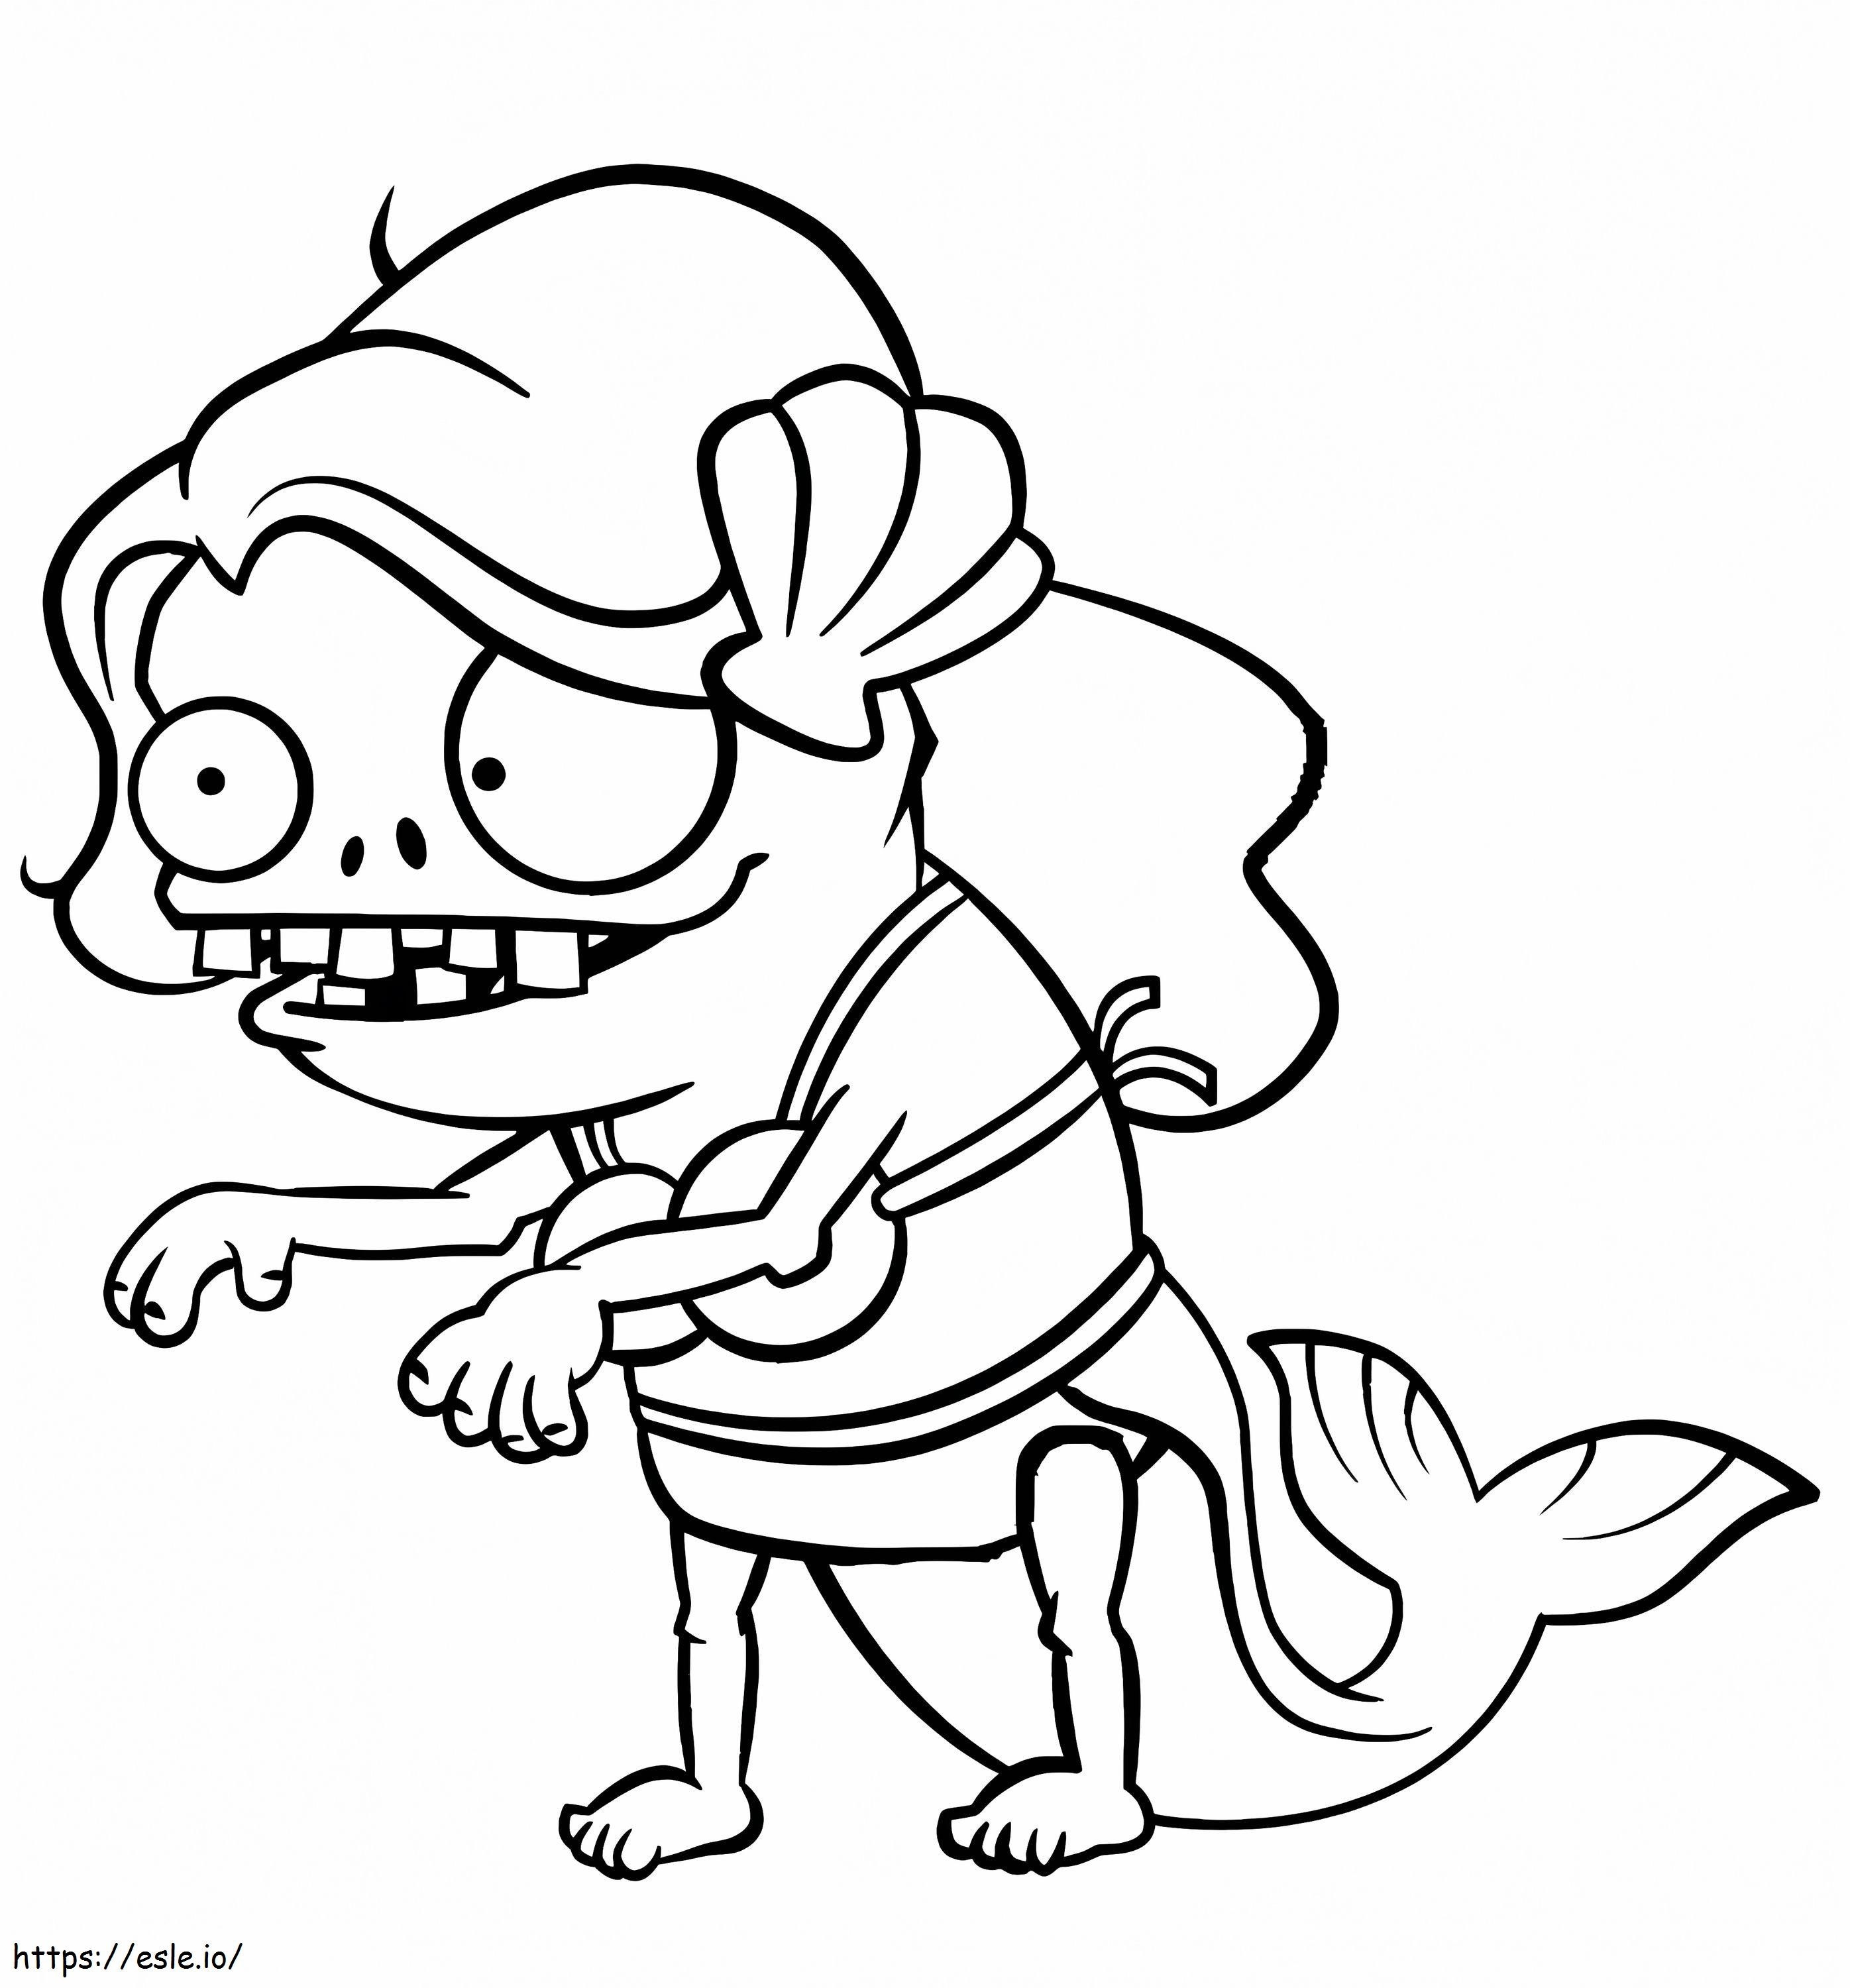 Zombie Siren coloring page